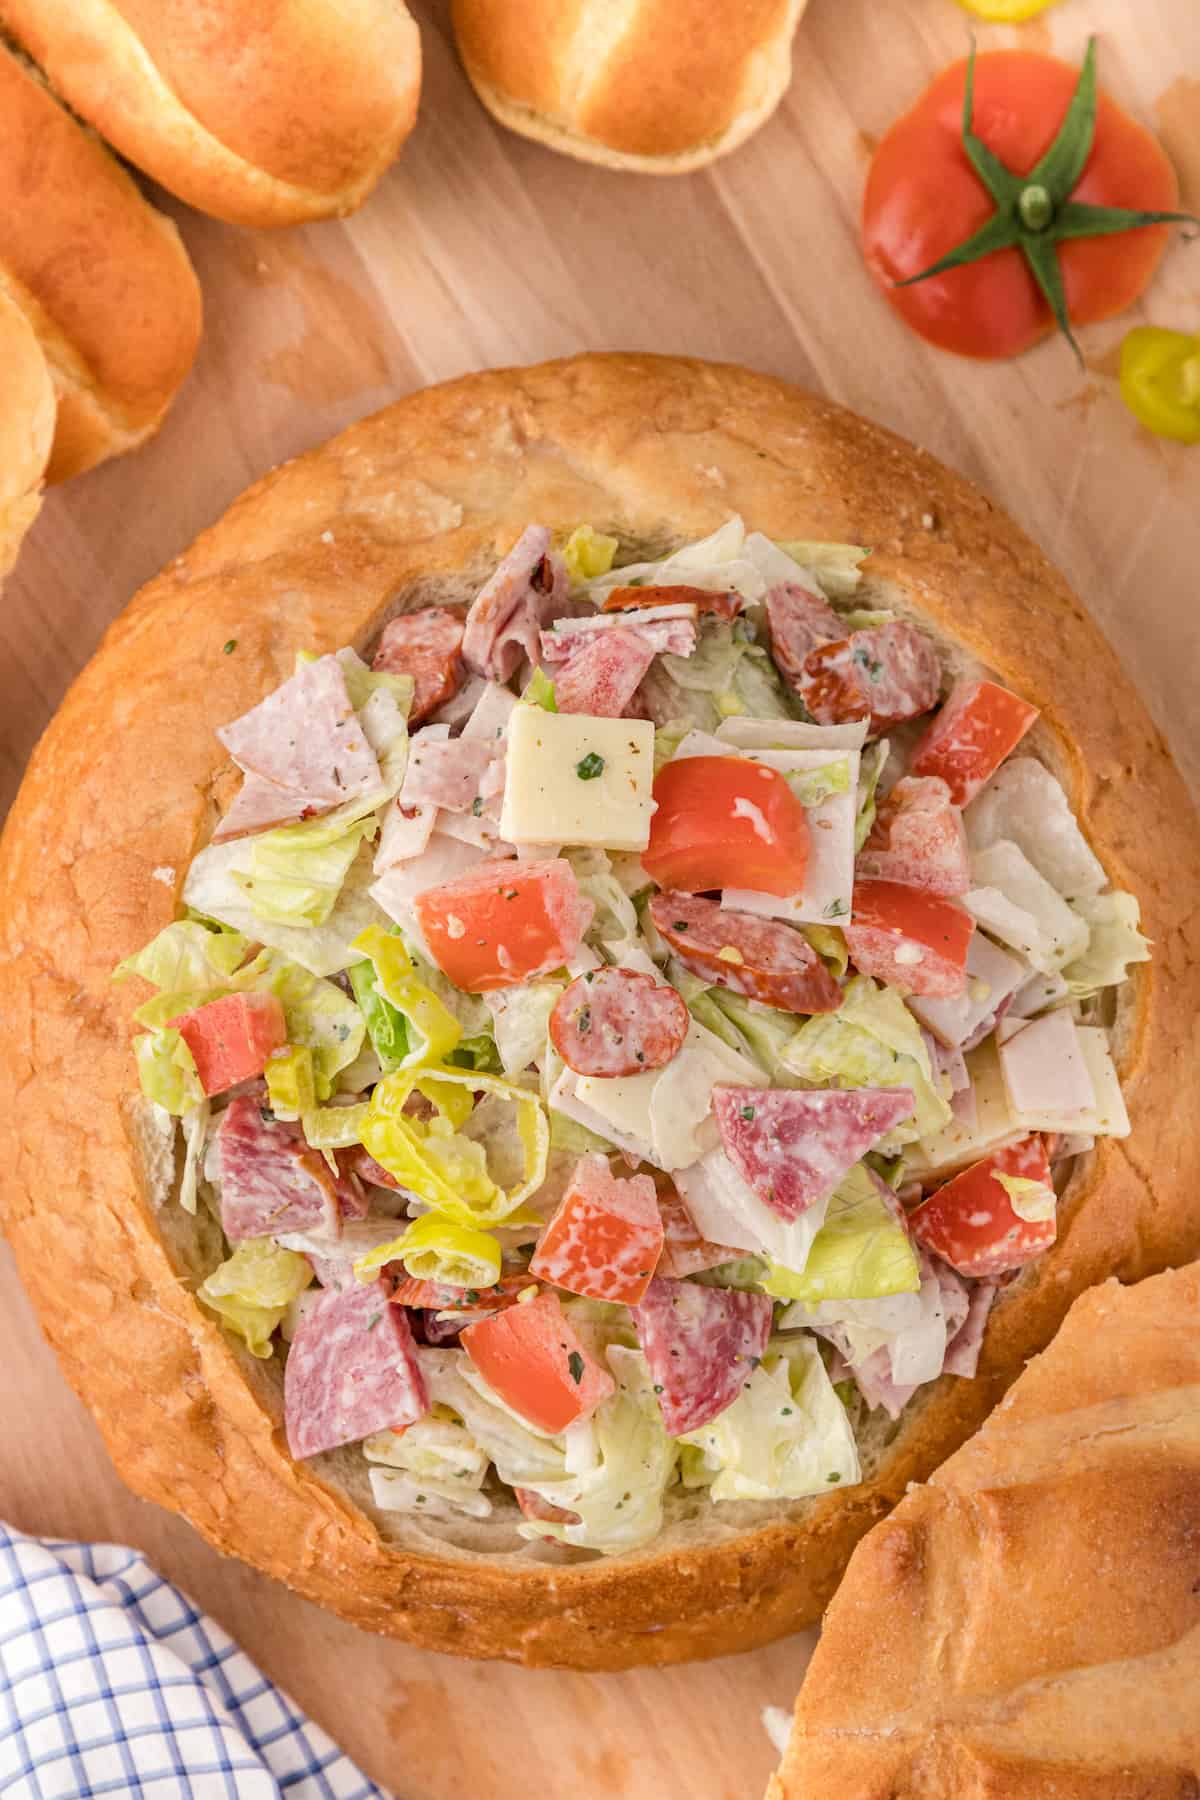 fill the bread bowl with the prepared dip